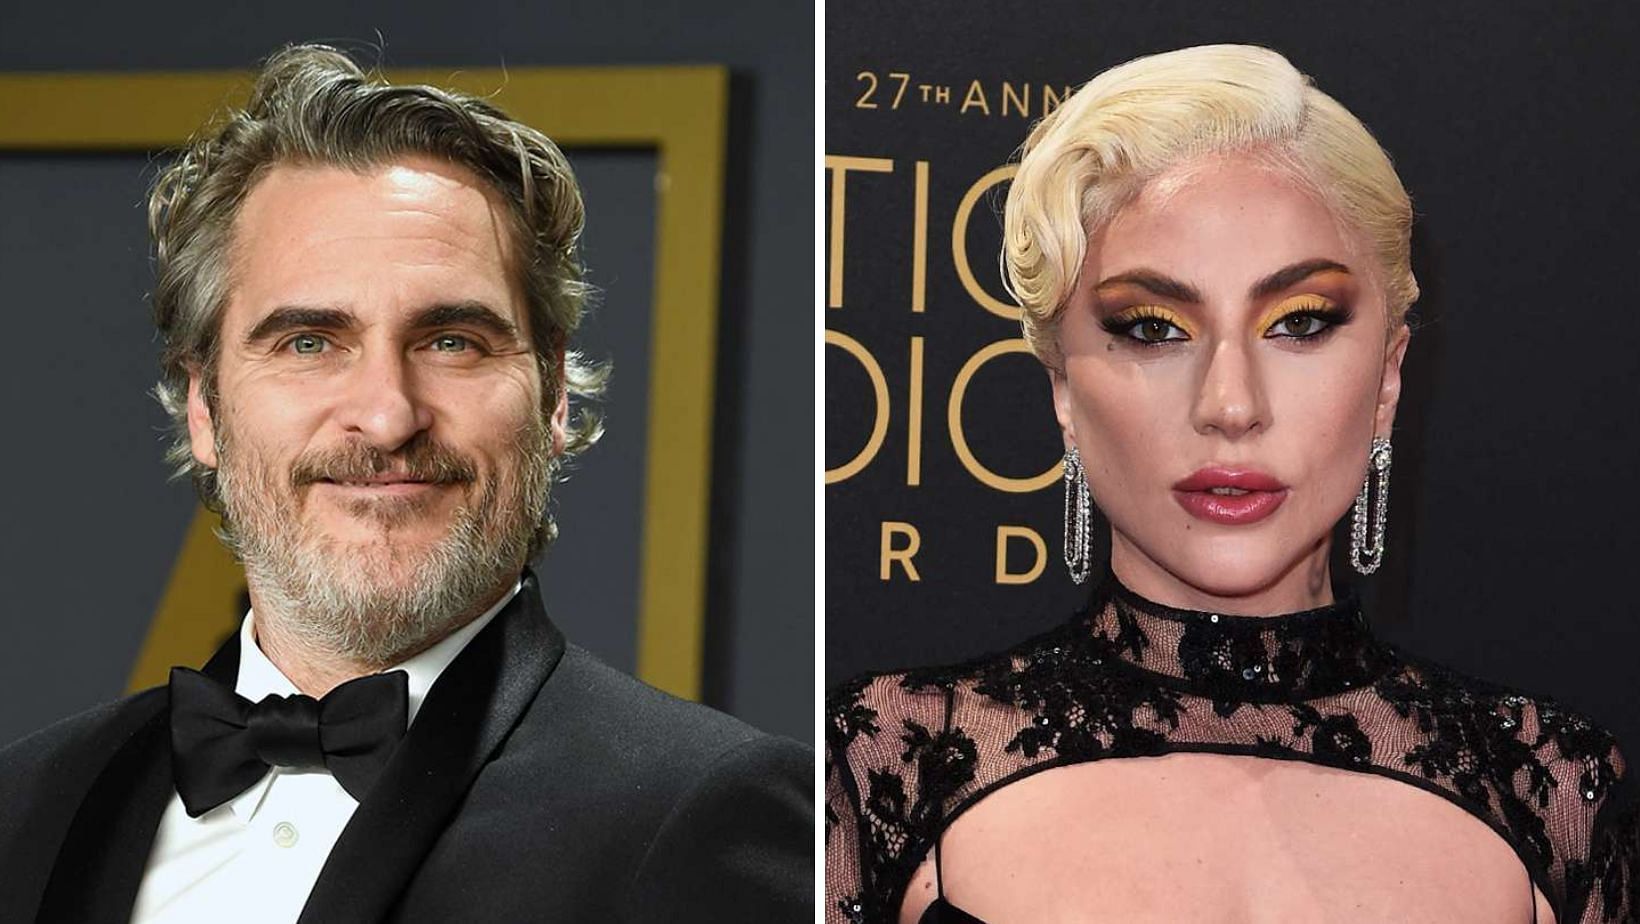 Harley Quinn and the Joker, as portrayed by Lady Gaga and Joaquin Phoenix, take center stage in the highly anticipated 